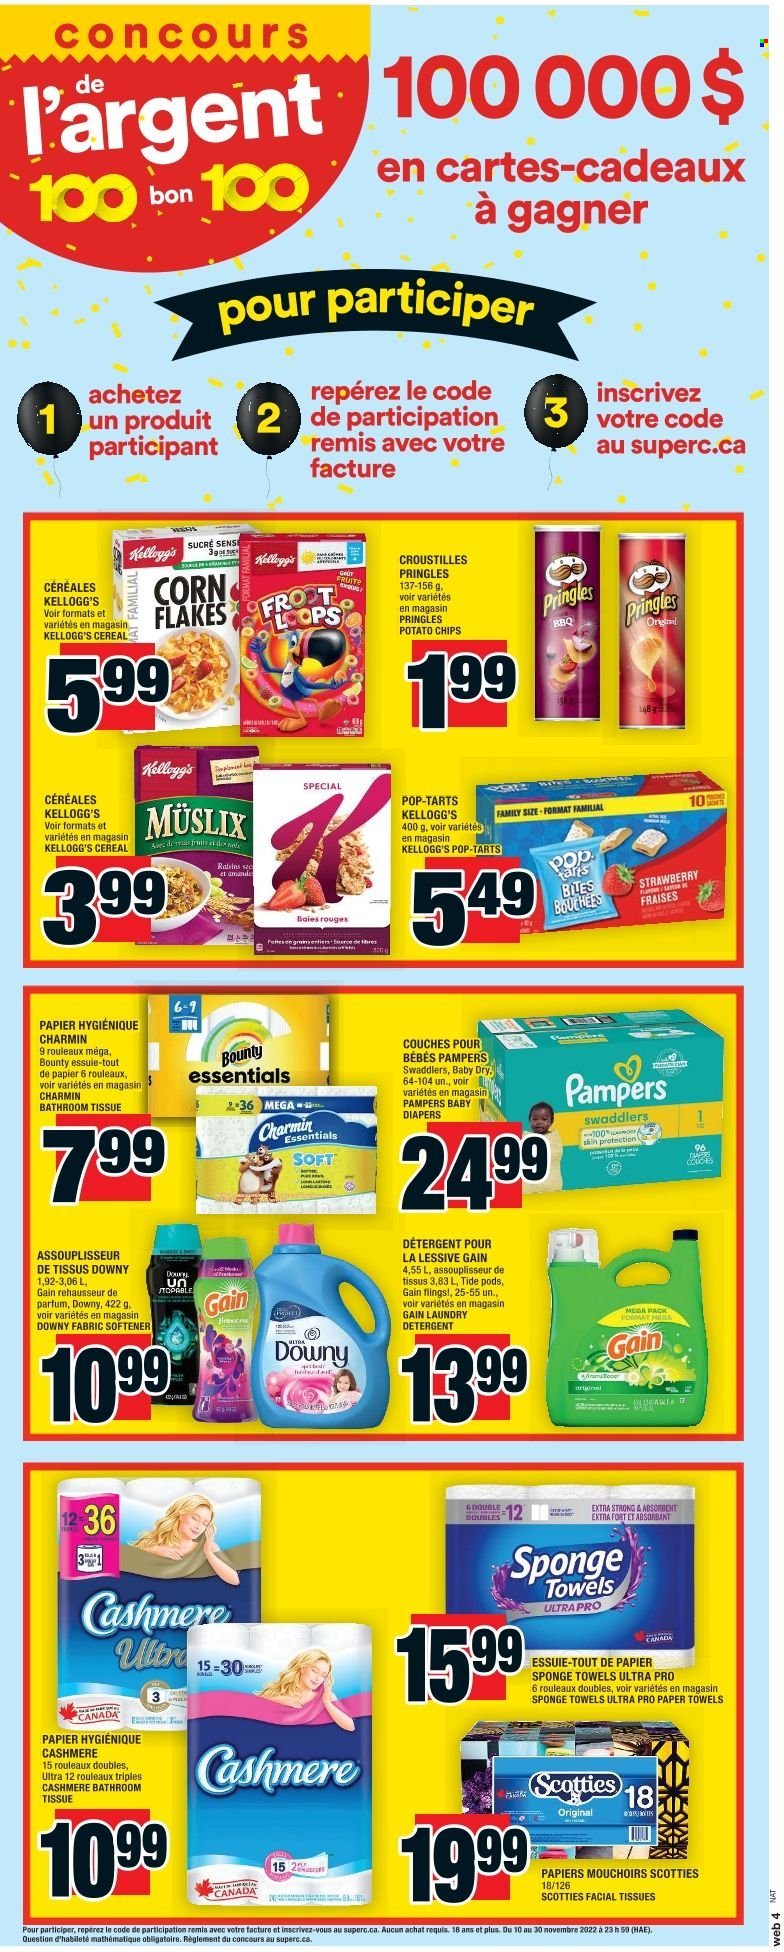 thumbnail - Super C Flyer - November 24, 2022 - November 30, 2022 - Sales products - Bounty, Kellogg's, Pop-Tarts, potato chips, Pringles, chips, cereals, corn flakes, nappies, bath tissue, kitchen towels, paper towels, Charmin, Gain, Tide, fabric softener, laundry detergent, Downy Laundry, facial tissues, eau de parfum, detergent, Pampers. Page 12.